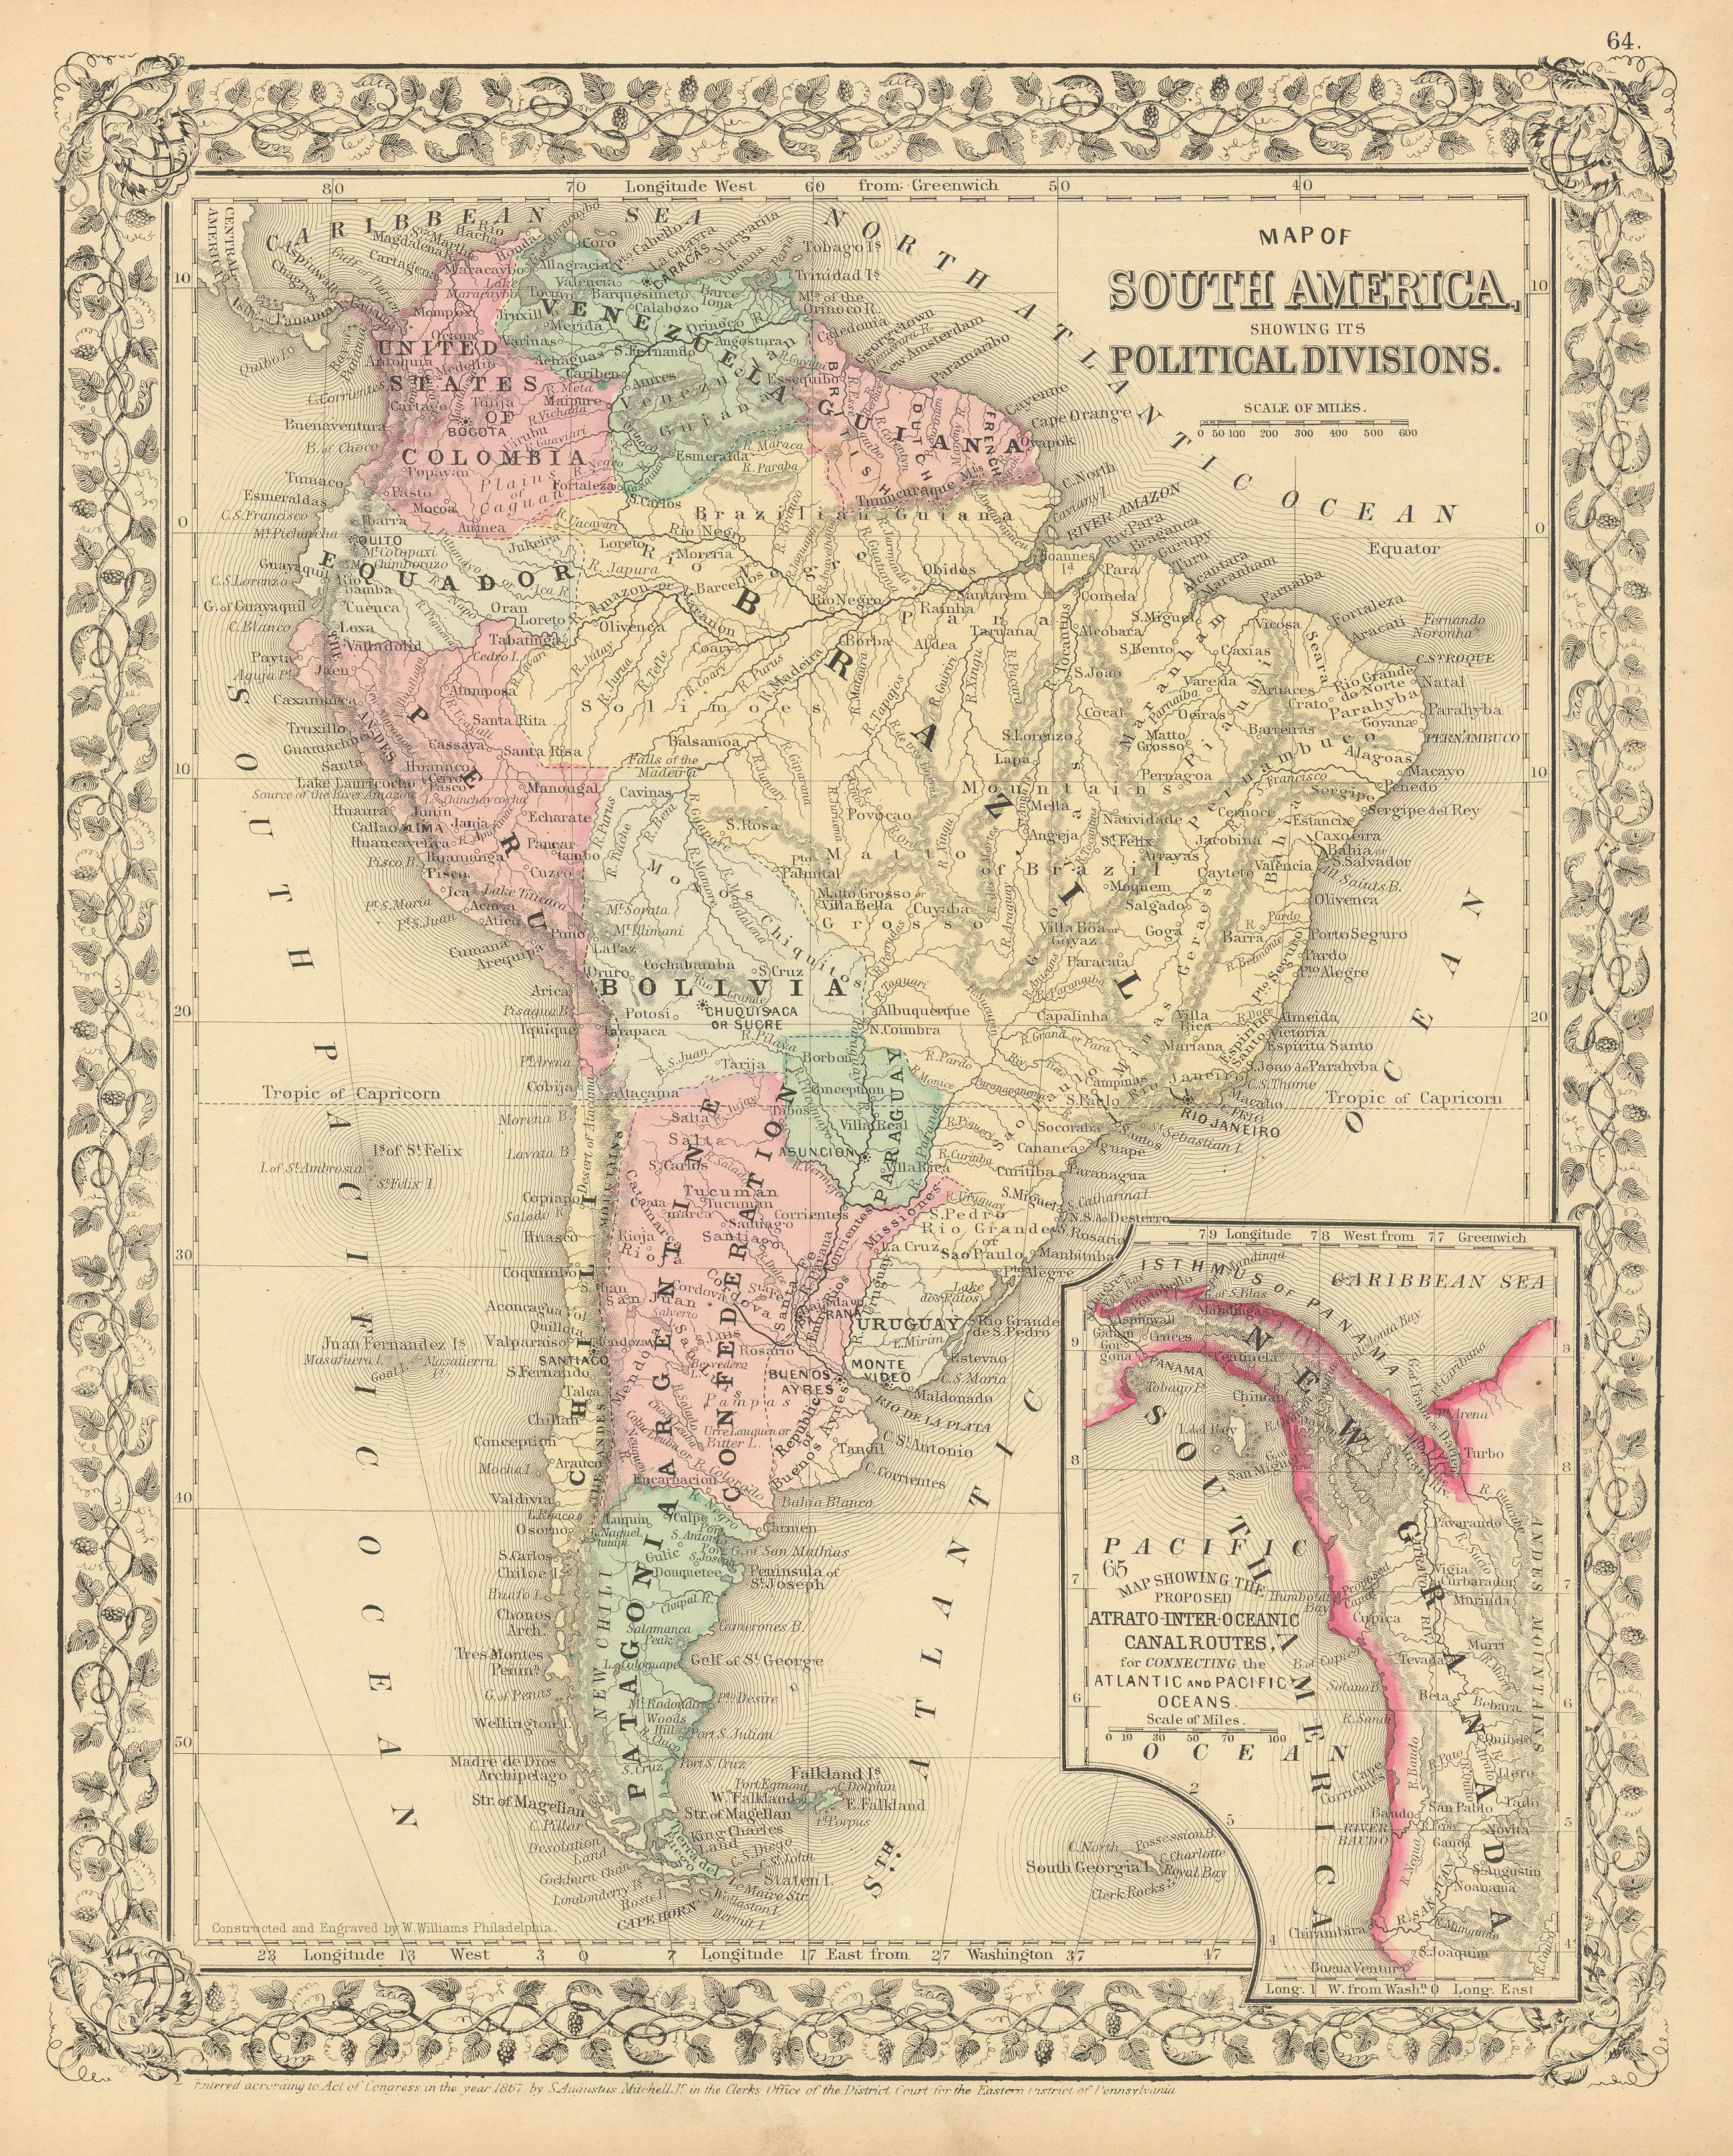 South America. Proposed Atrato-Inter-Oceanic Canal Routes. MITCHELL 1869 map